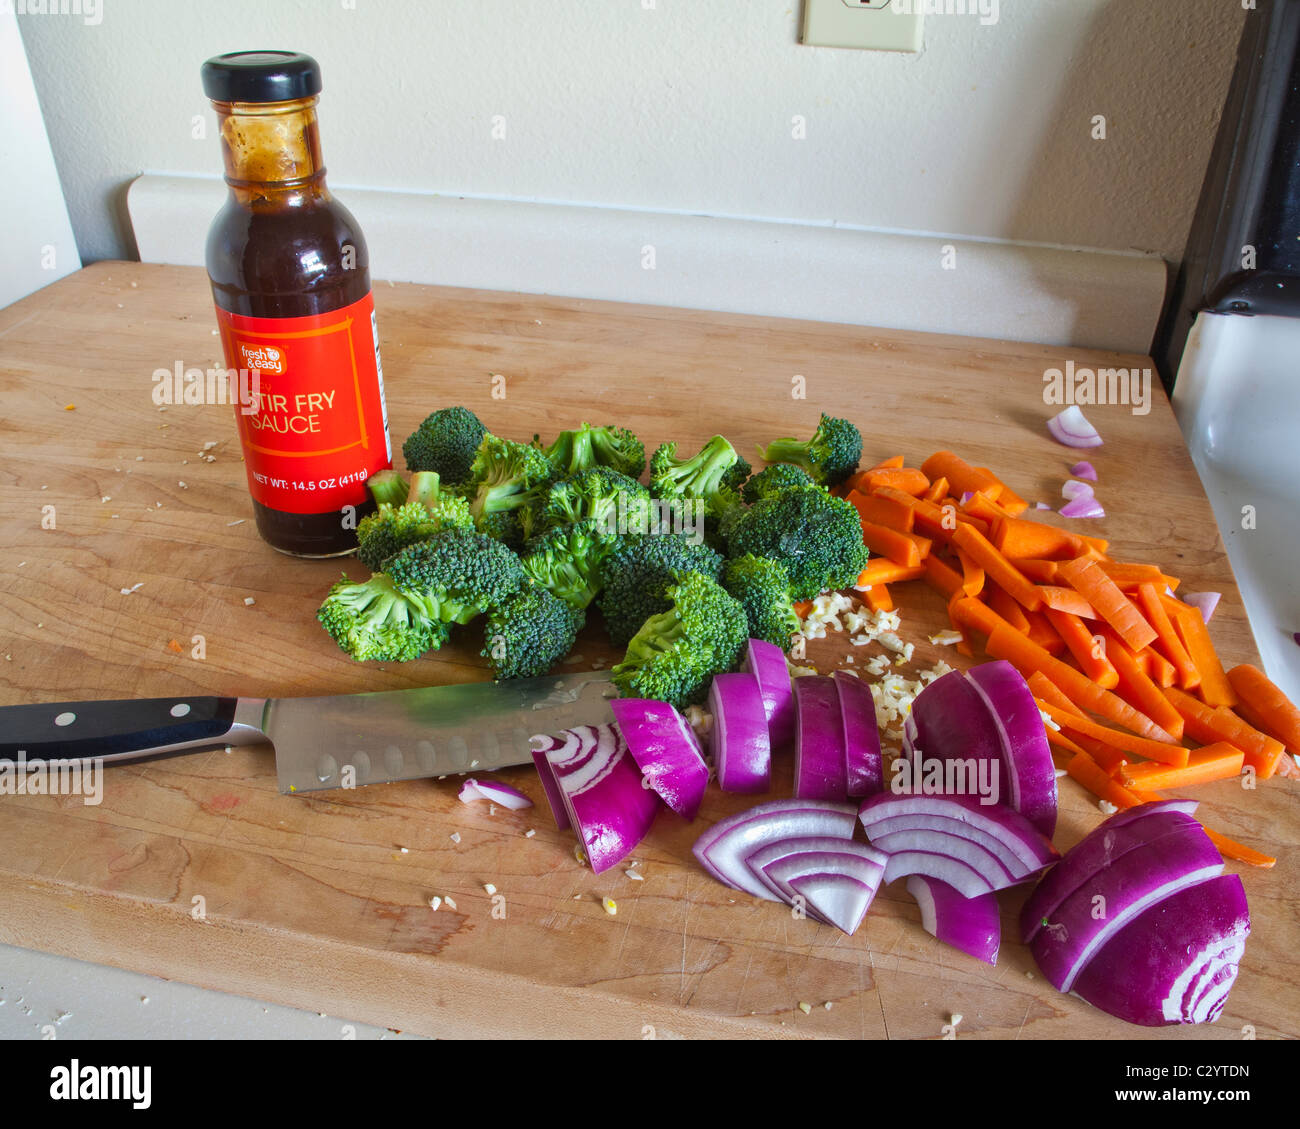 Cut up vegetables ready to be stir fried with a bottle of stir fry sauce Stock Photo